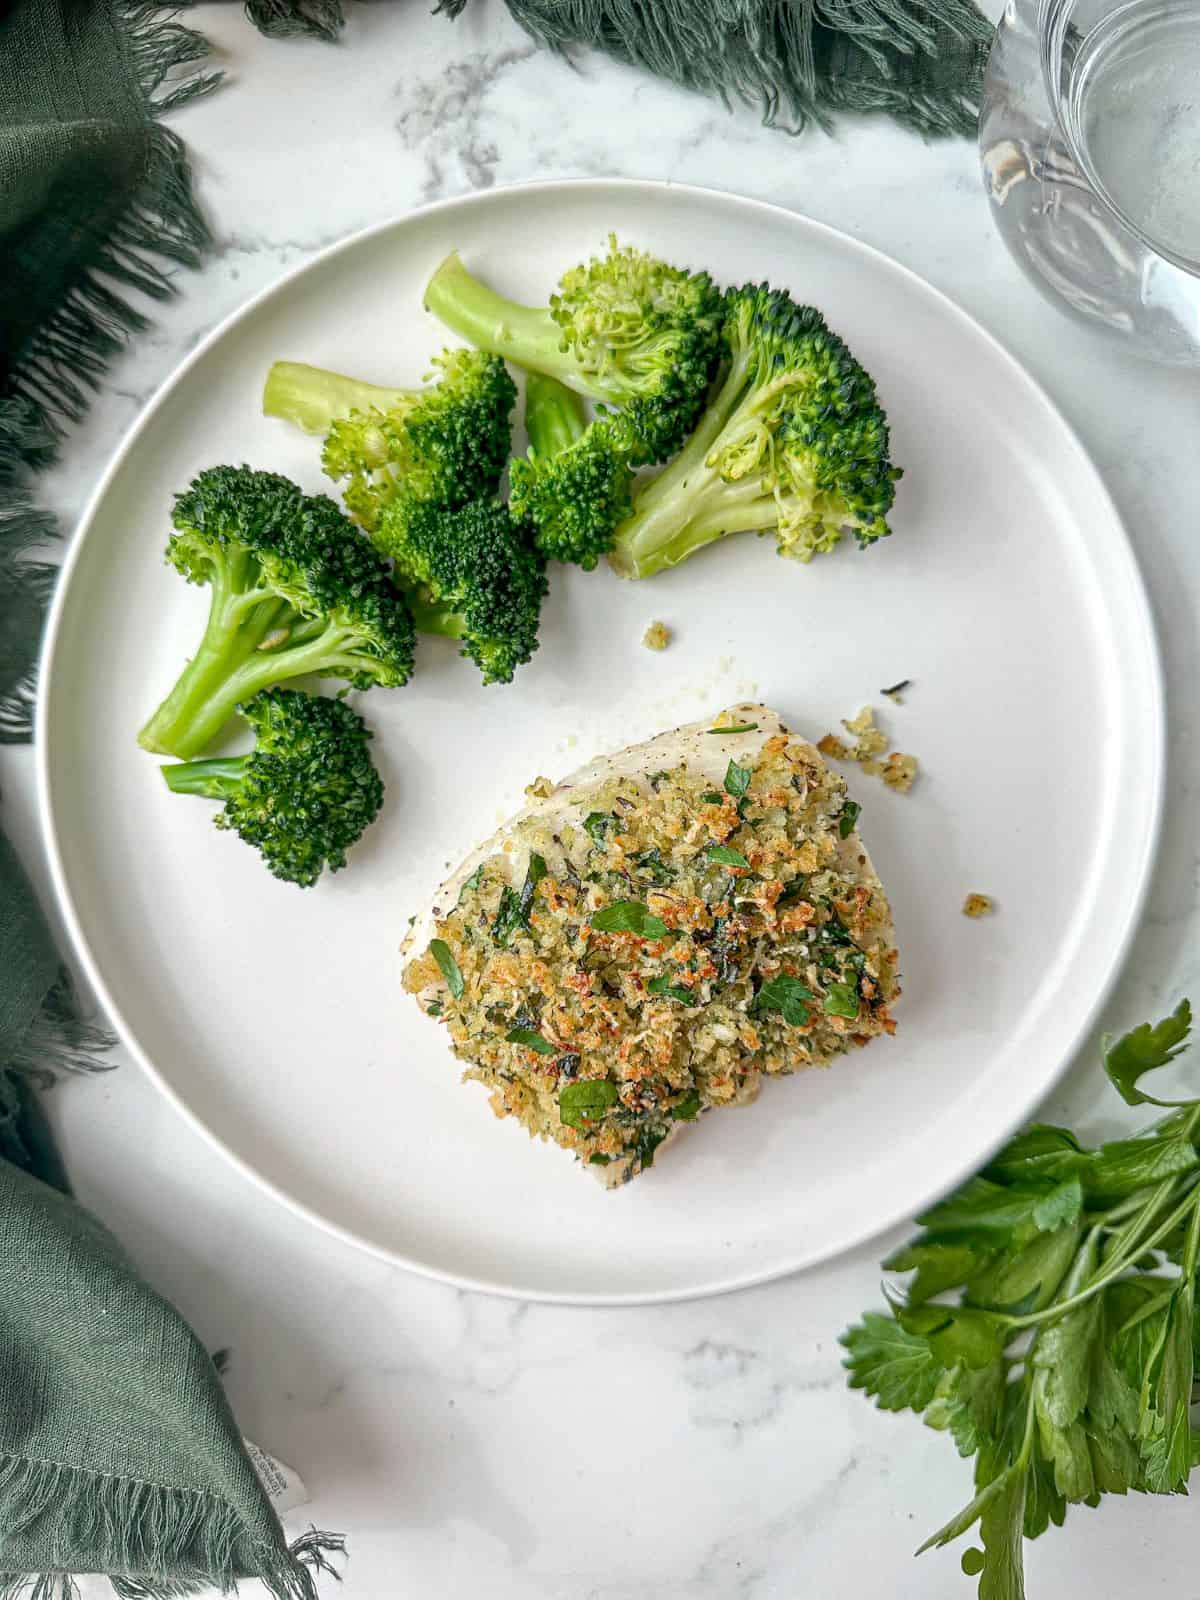 Baked parmesan crusted cod on a white plate with broccoli. Crust is golden brown and sprinkled with green parsley.